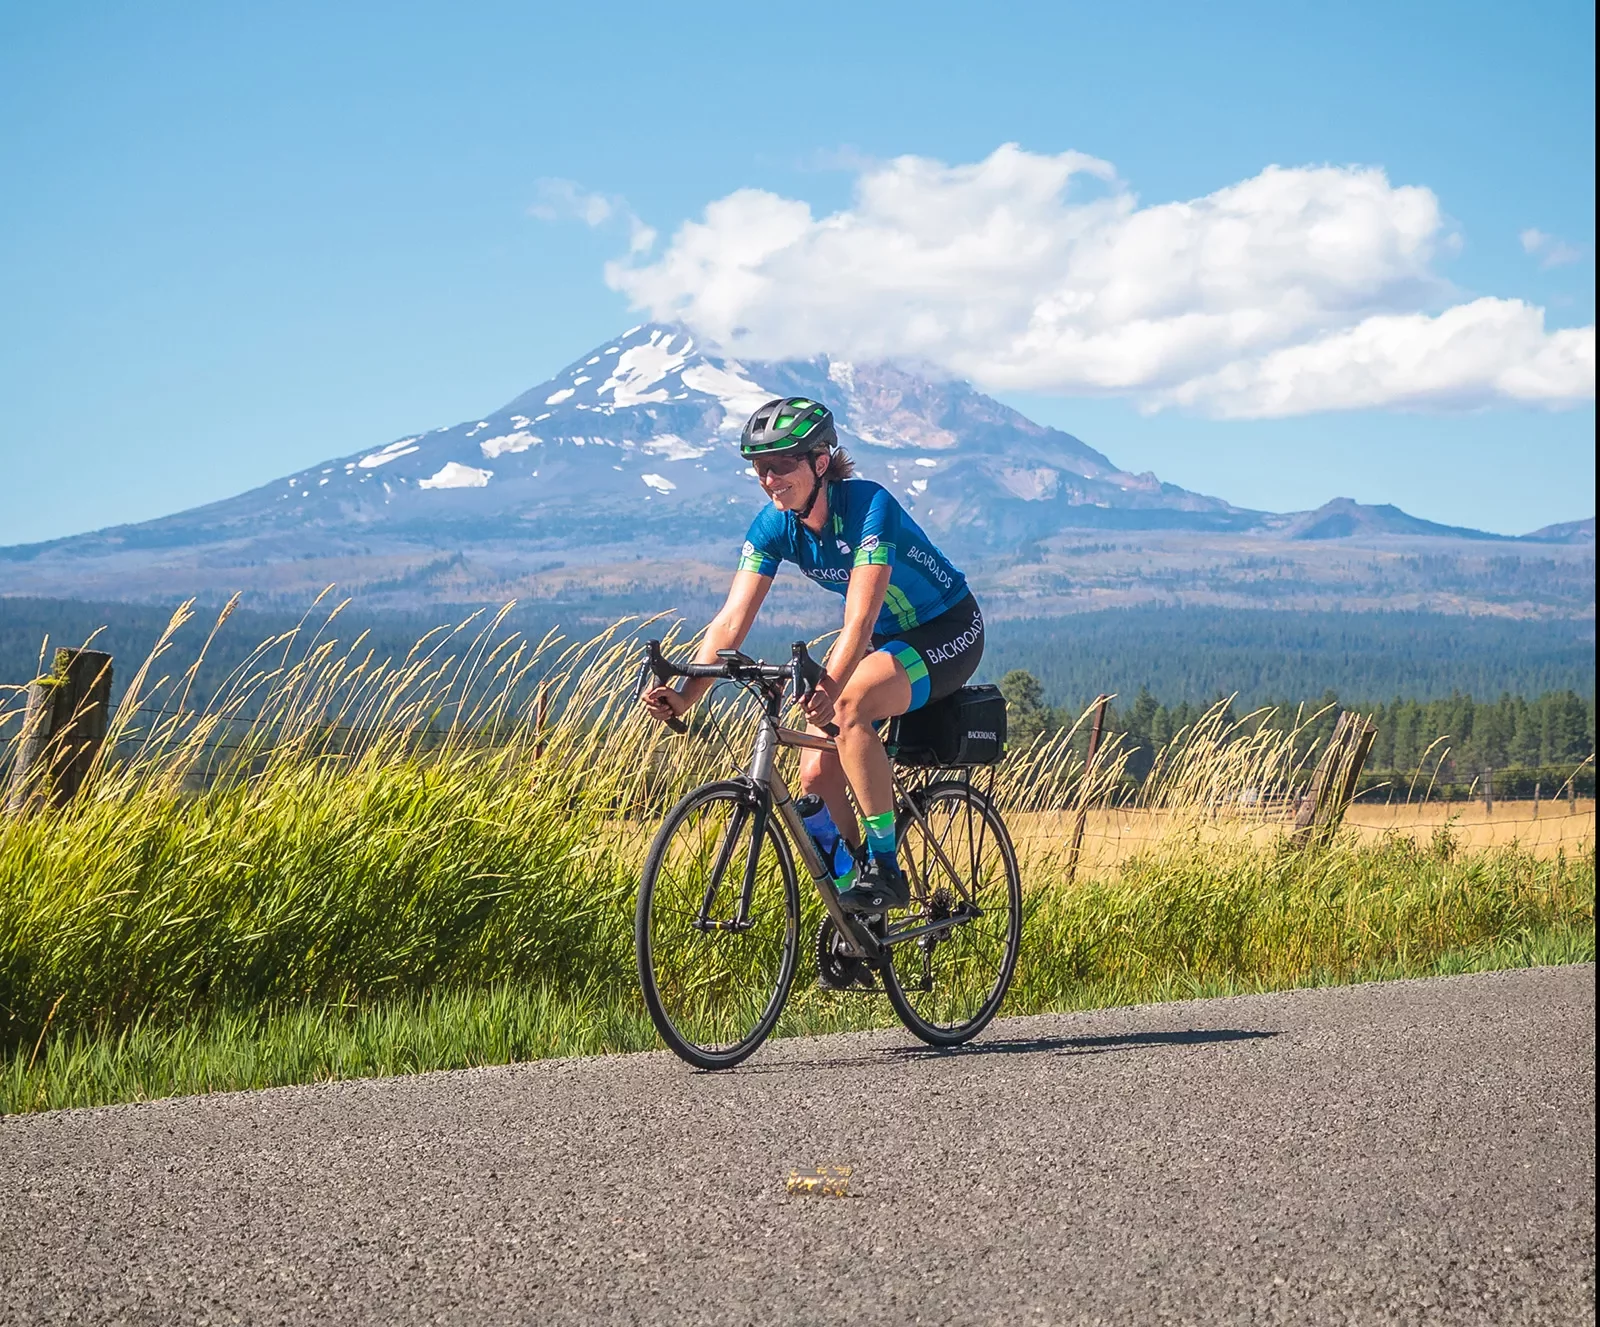 Guest cycling down grassy road, Mount Hood in background.